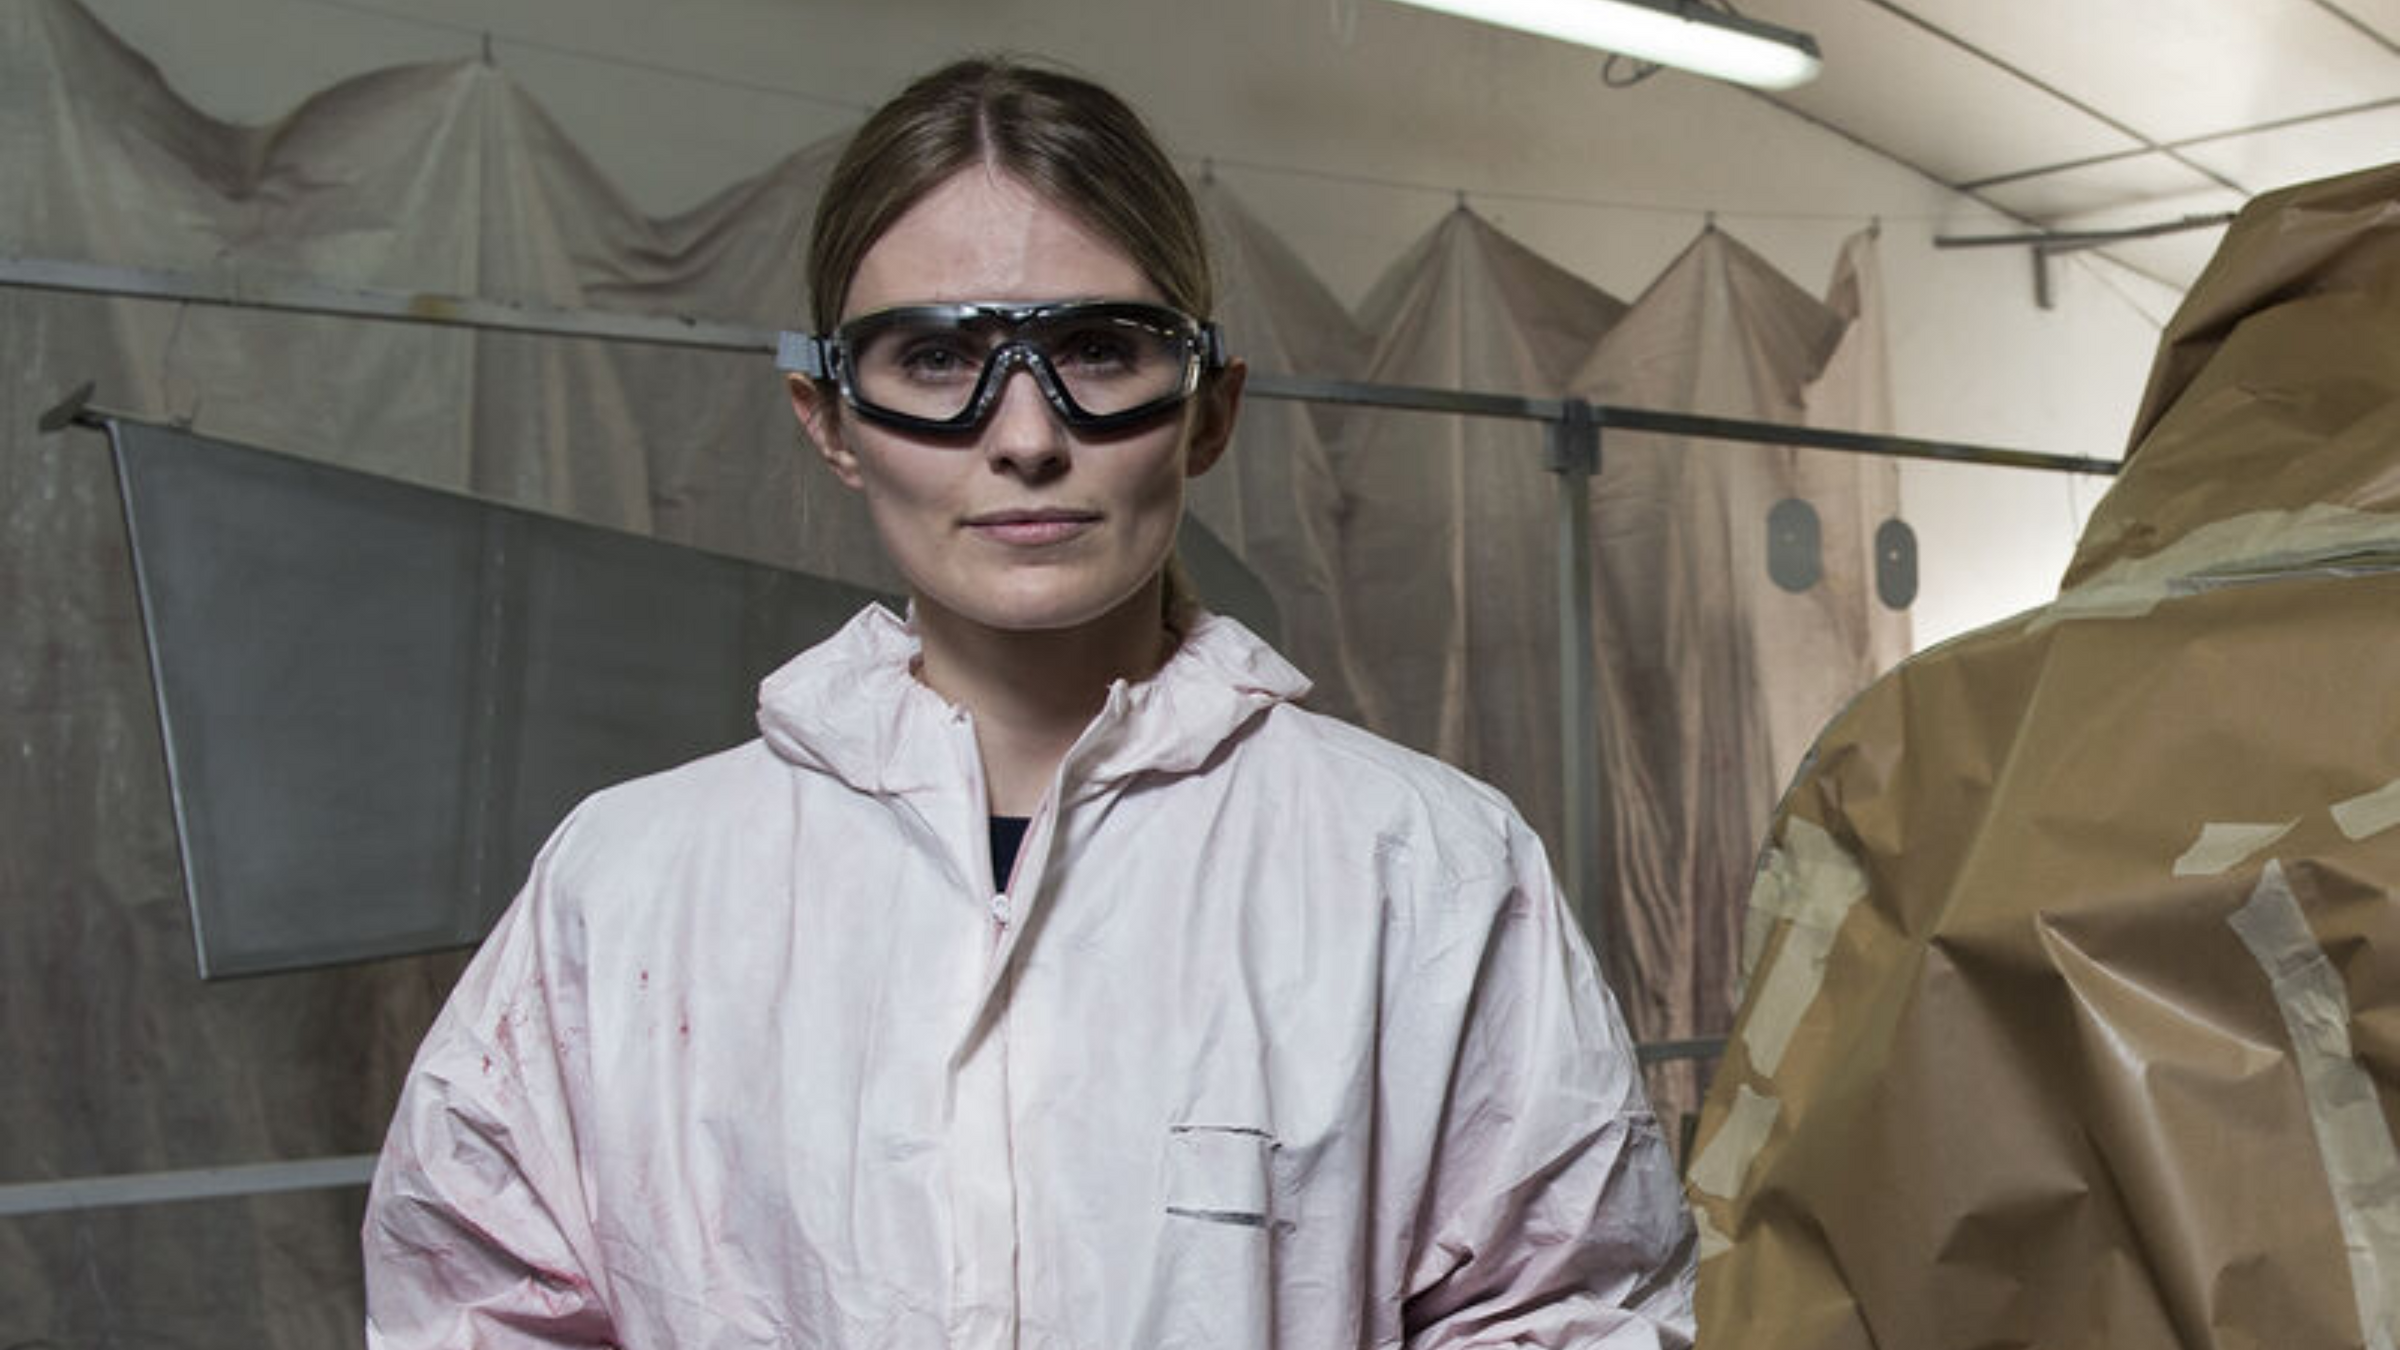 An image of Safety Goggles being worn by a model